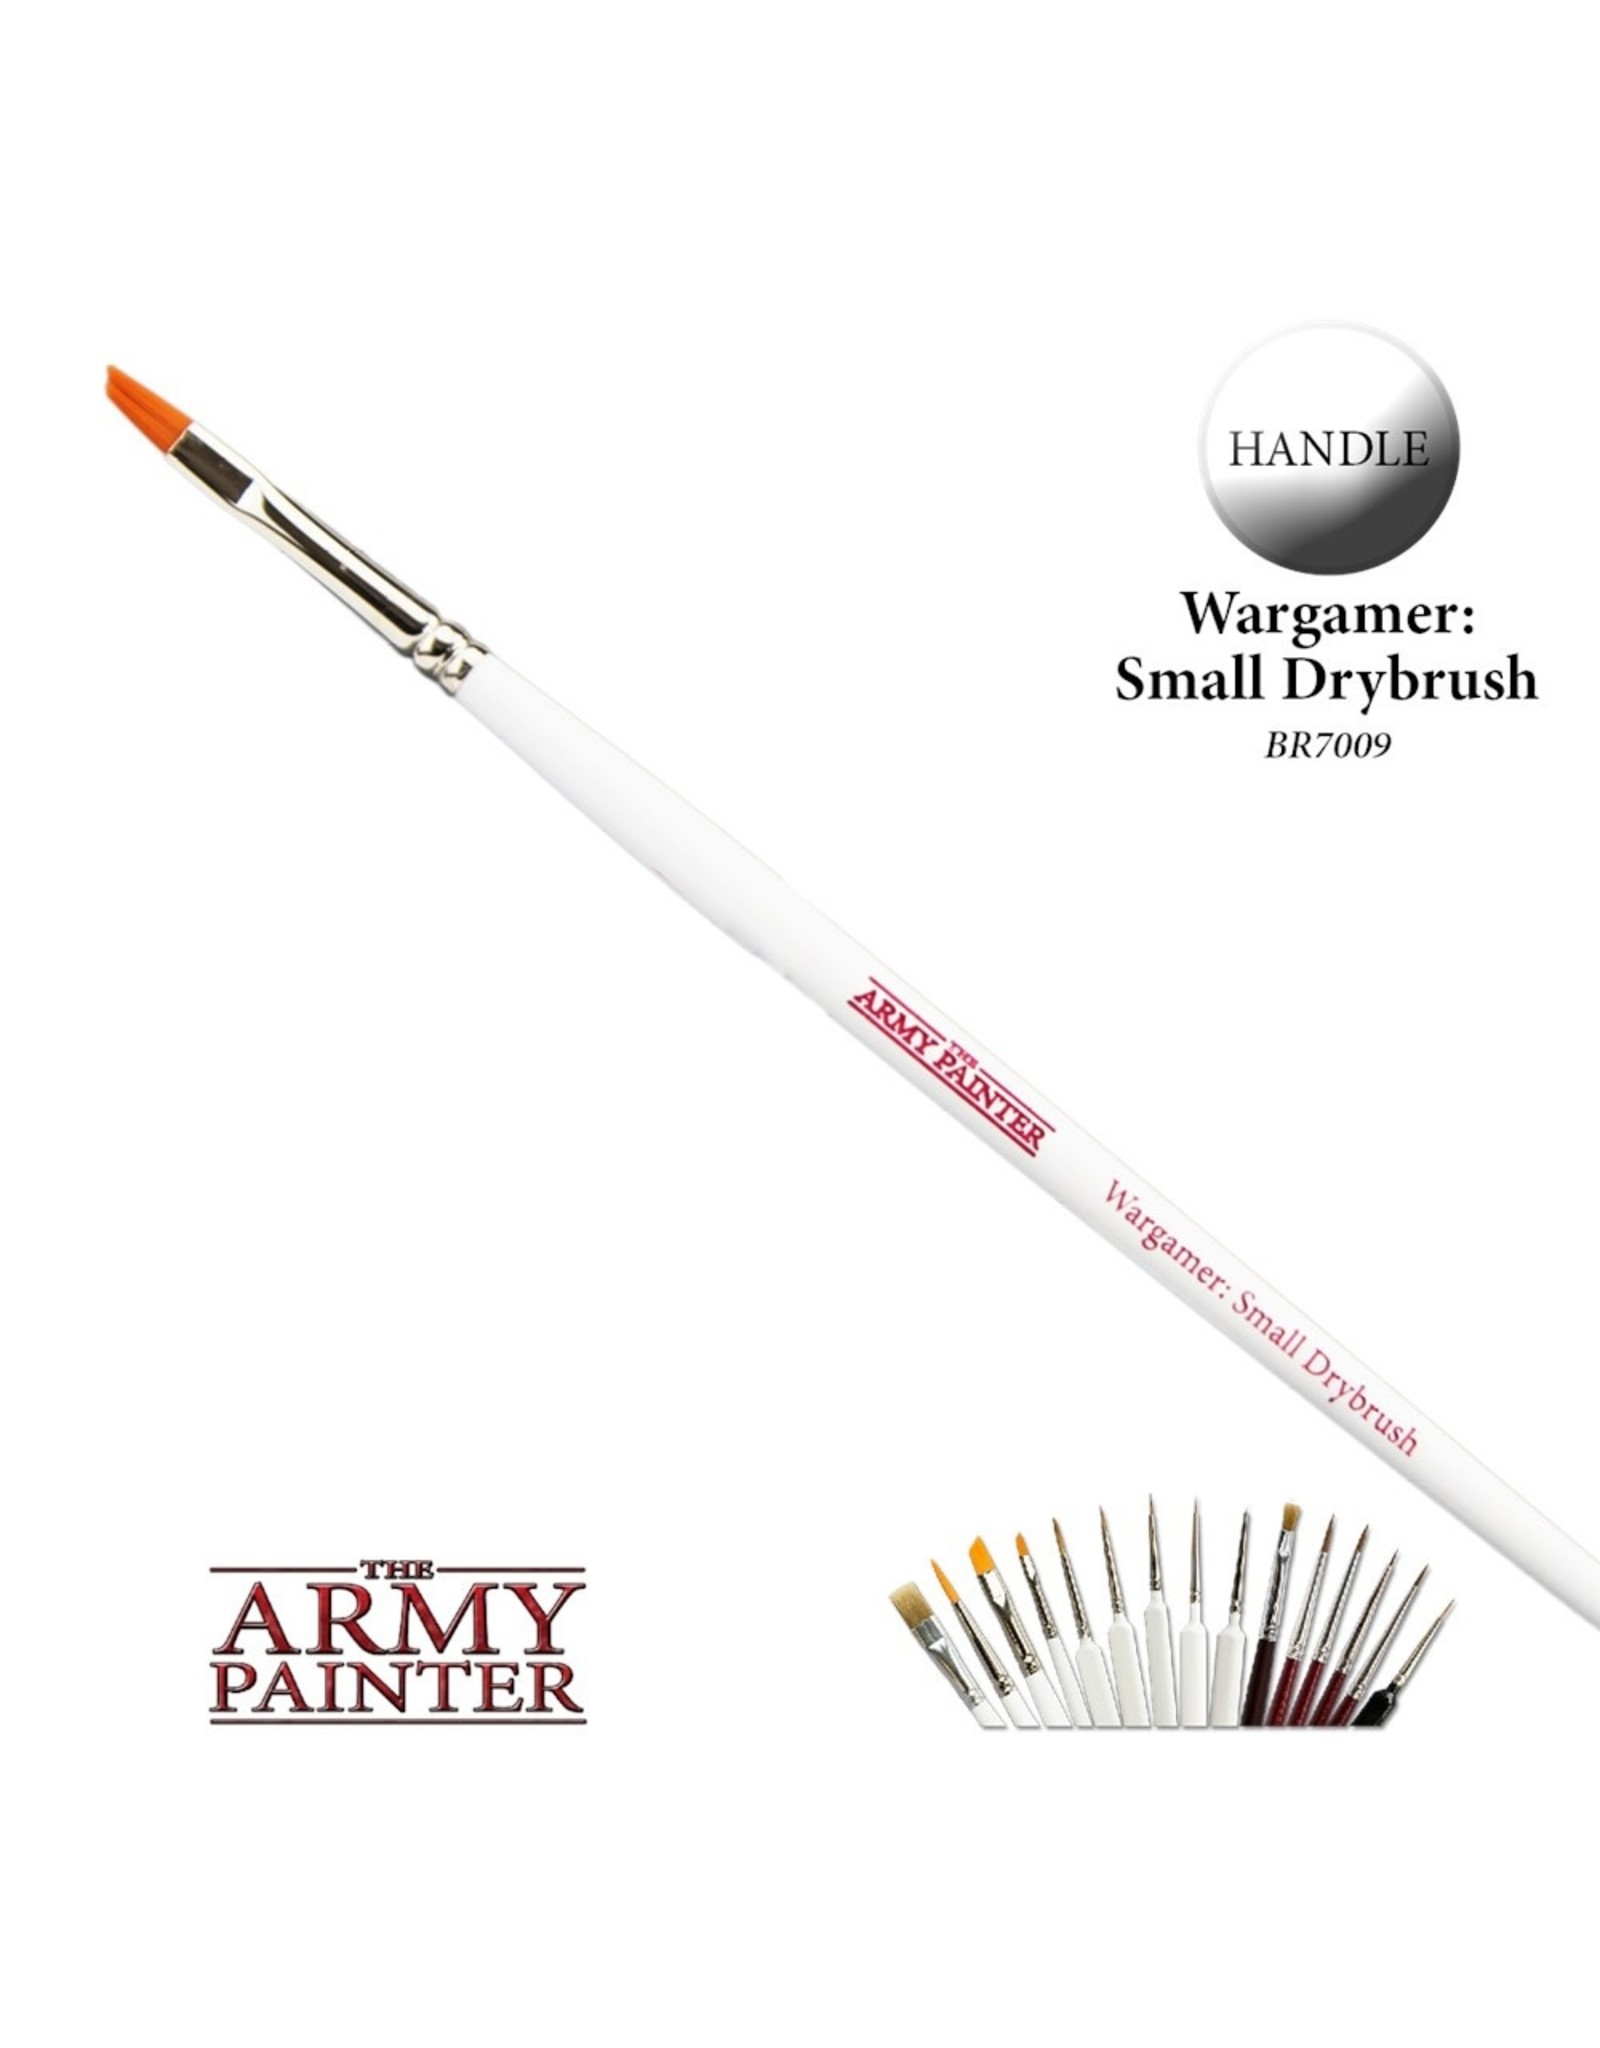 The Army Painter BR7009 Small Drybrush